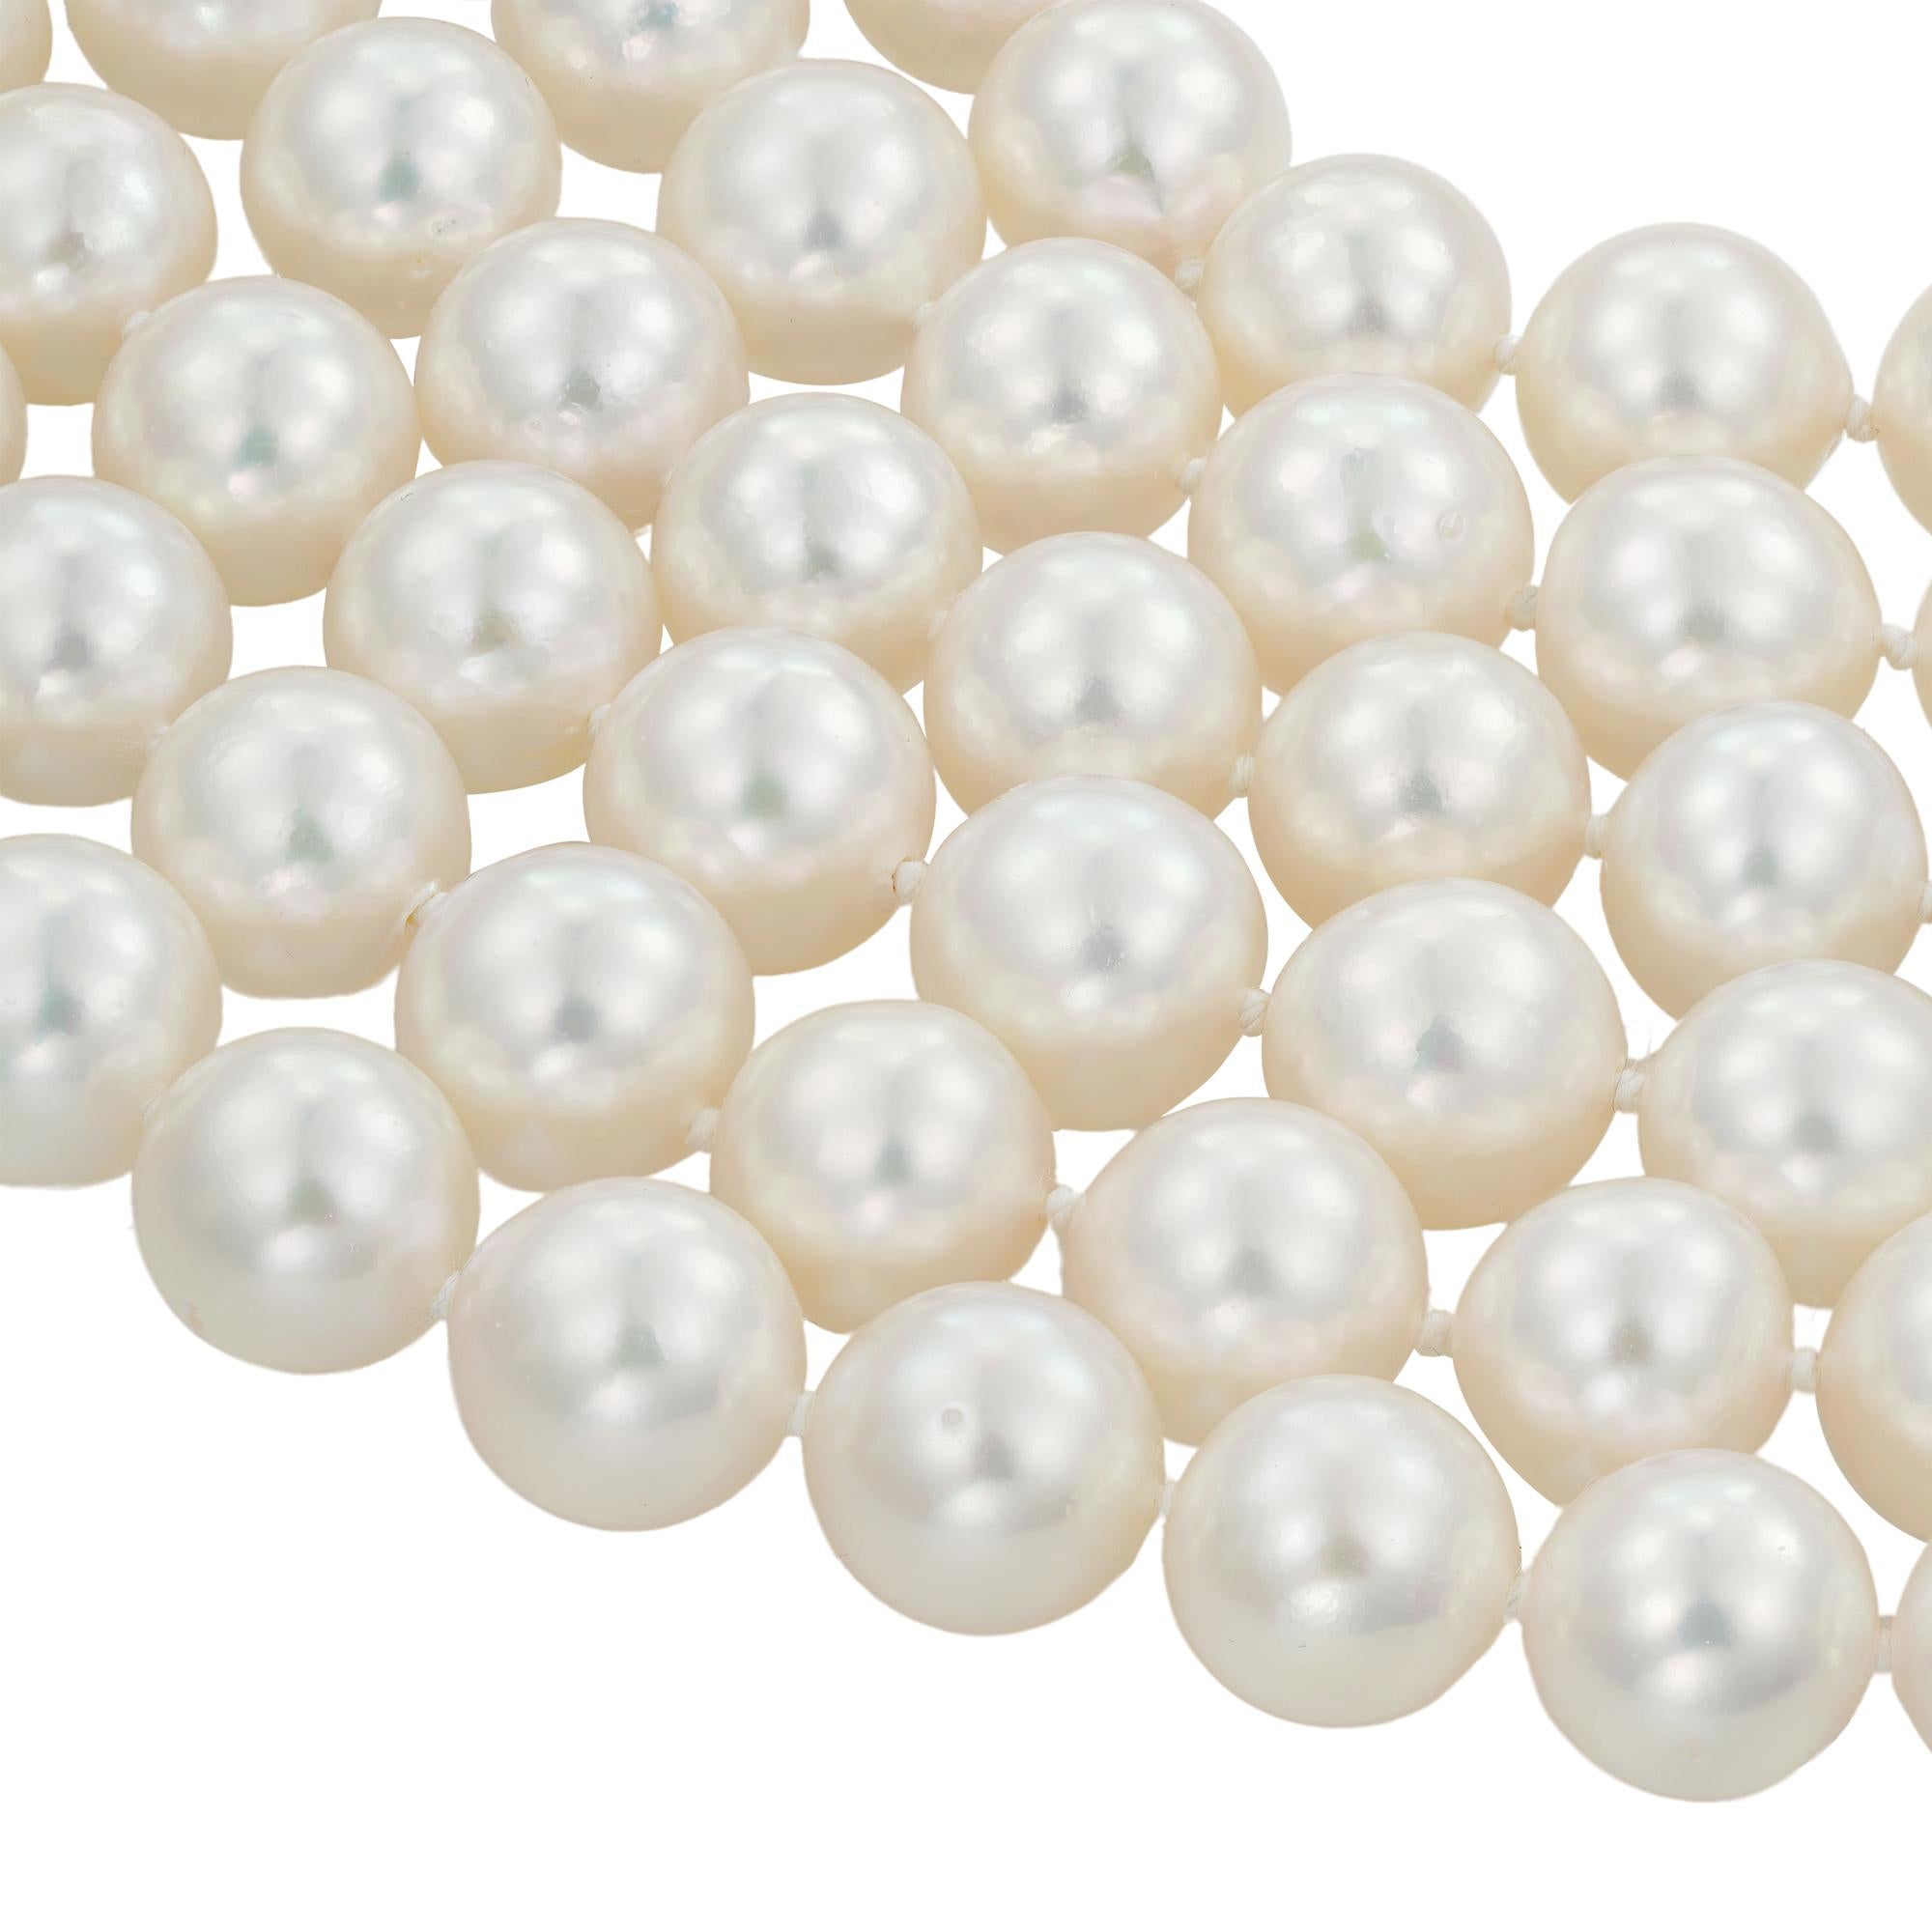 A fine long saltwater cultured pearl necklace, consisting of a hundred-twenty-six fine Akoya pearls measuring 9.5-10mm in diameter, all strung and knotted to a single row measuring approximately 128cm long, gross weight 161.6 grams.

This cultured